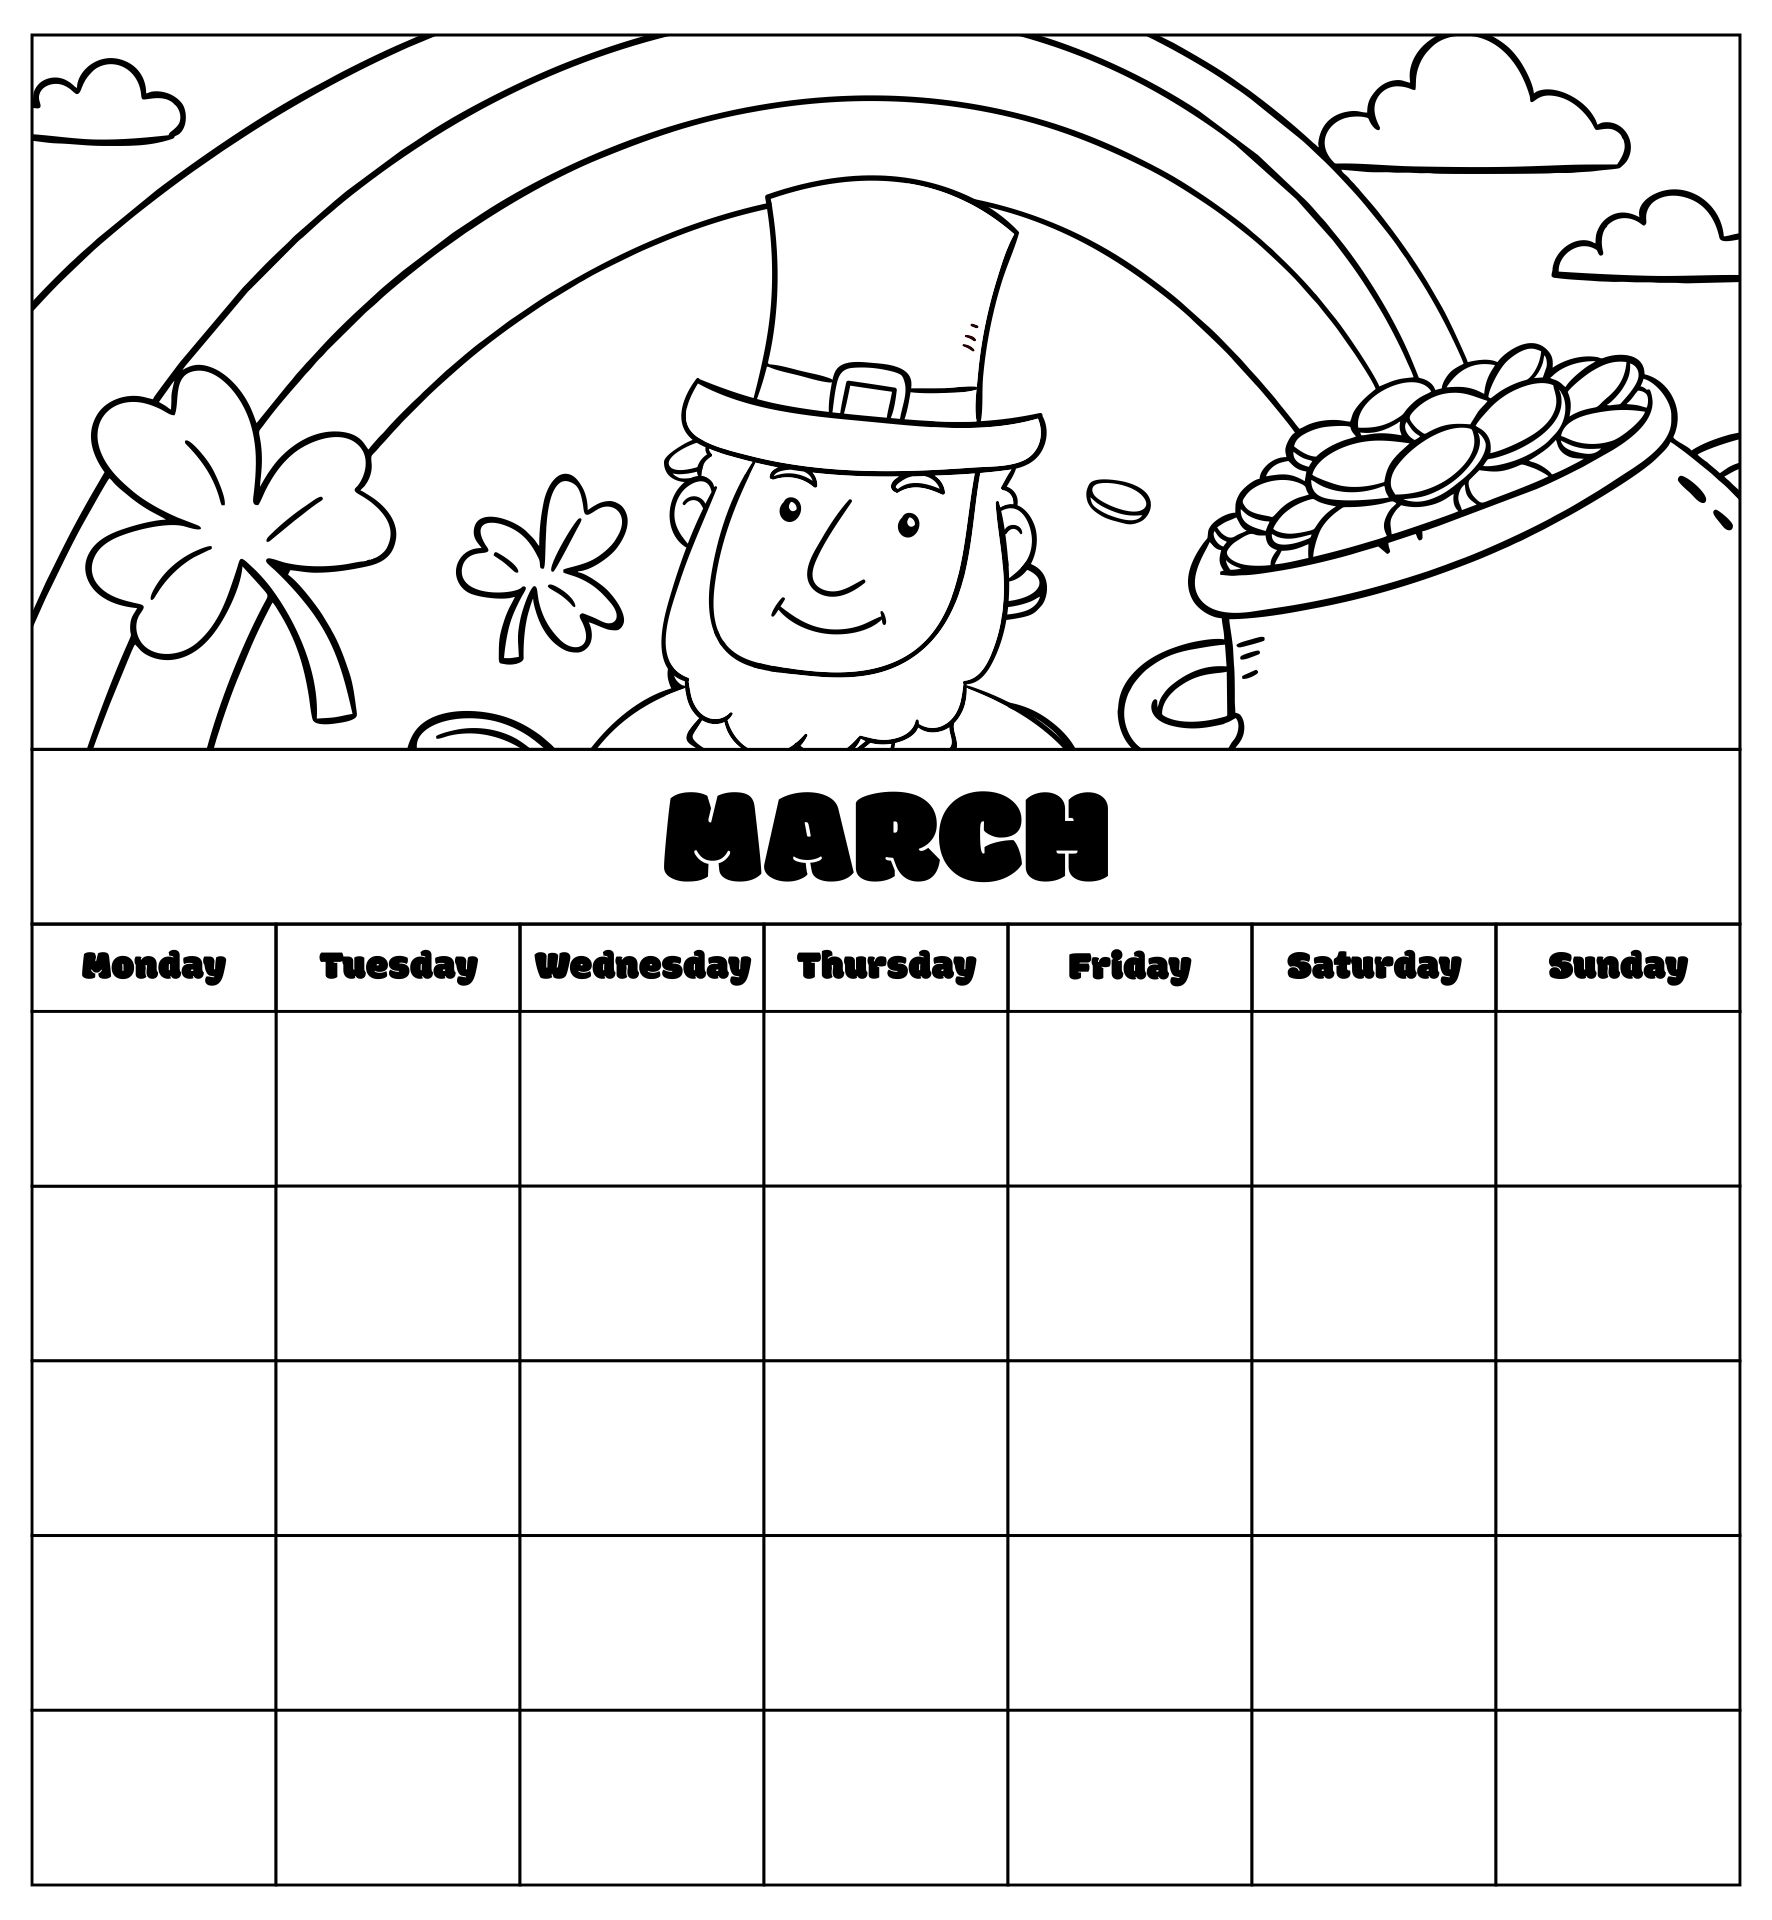 March Printable Activity Calendar For Kids